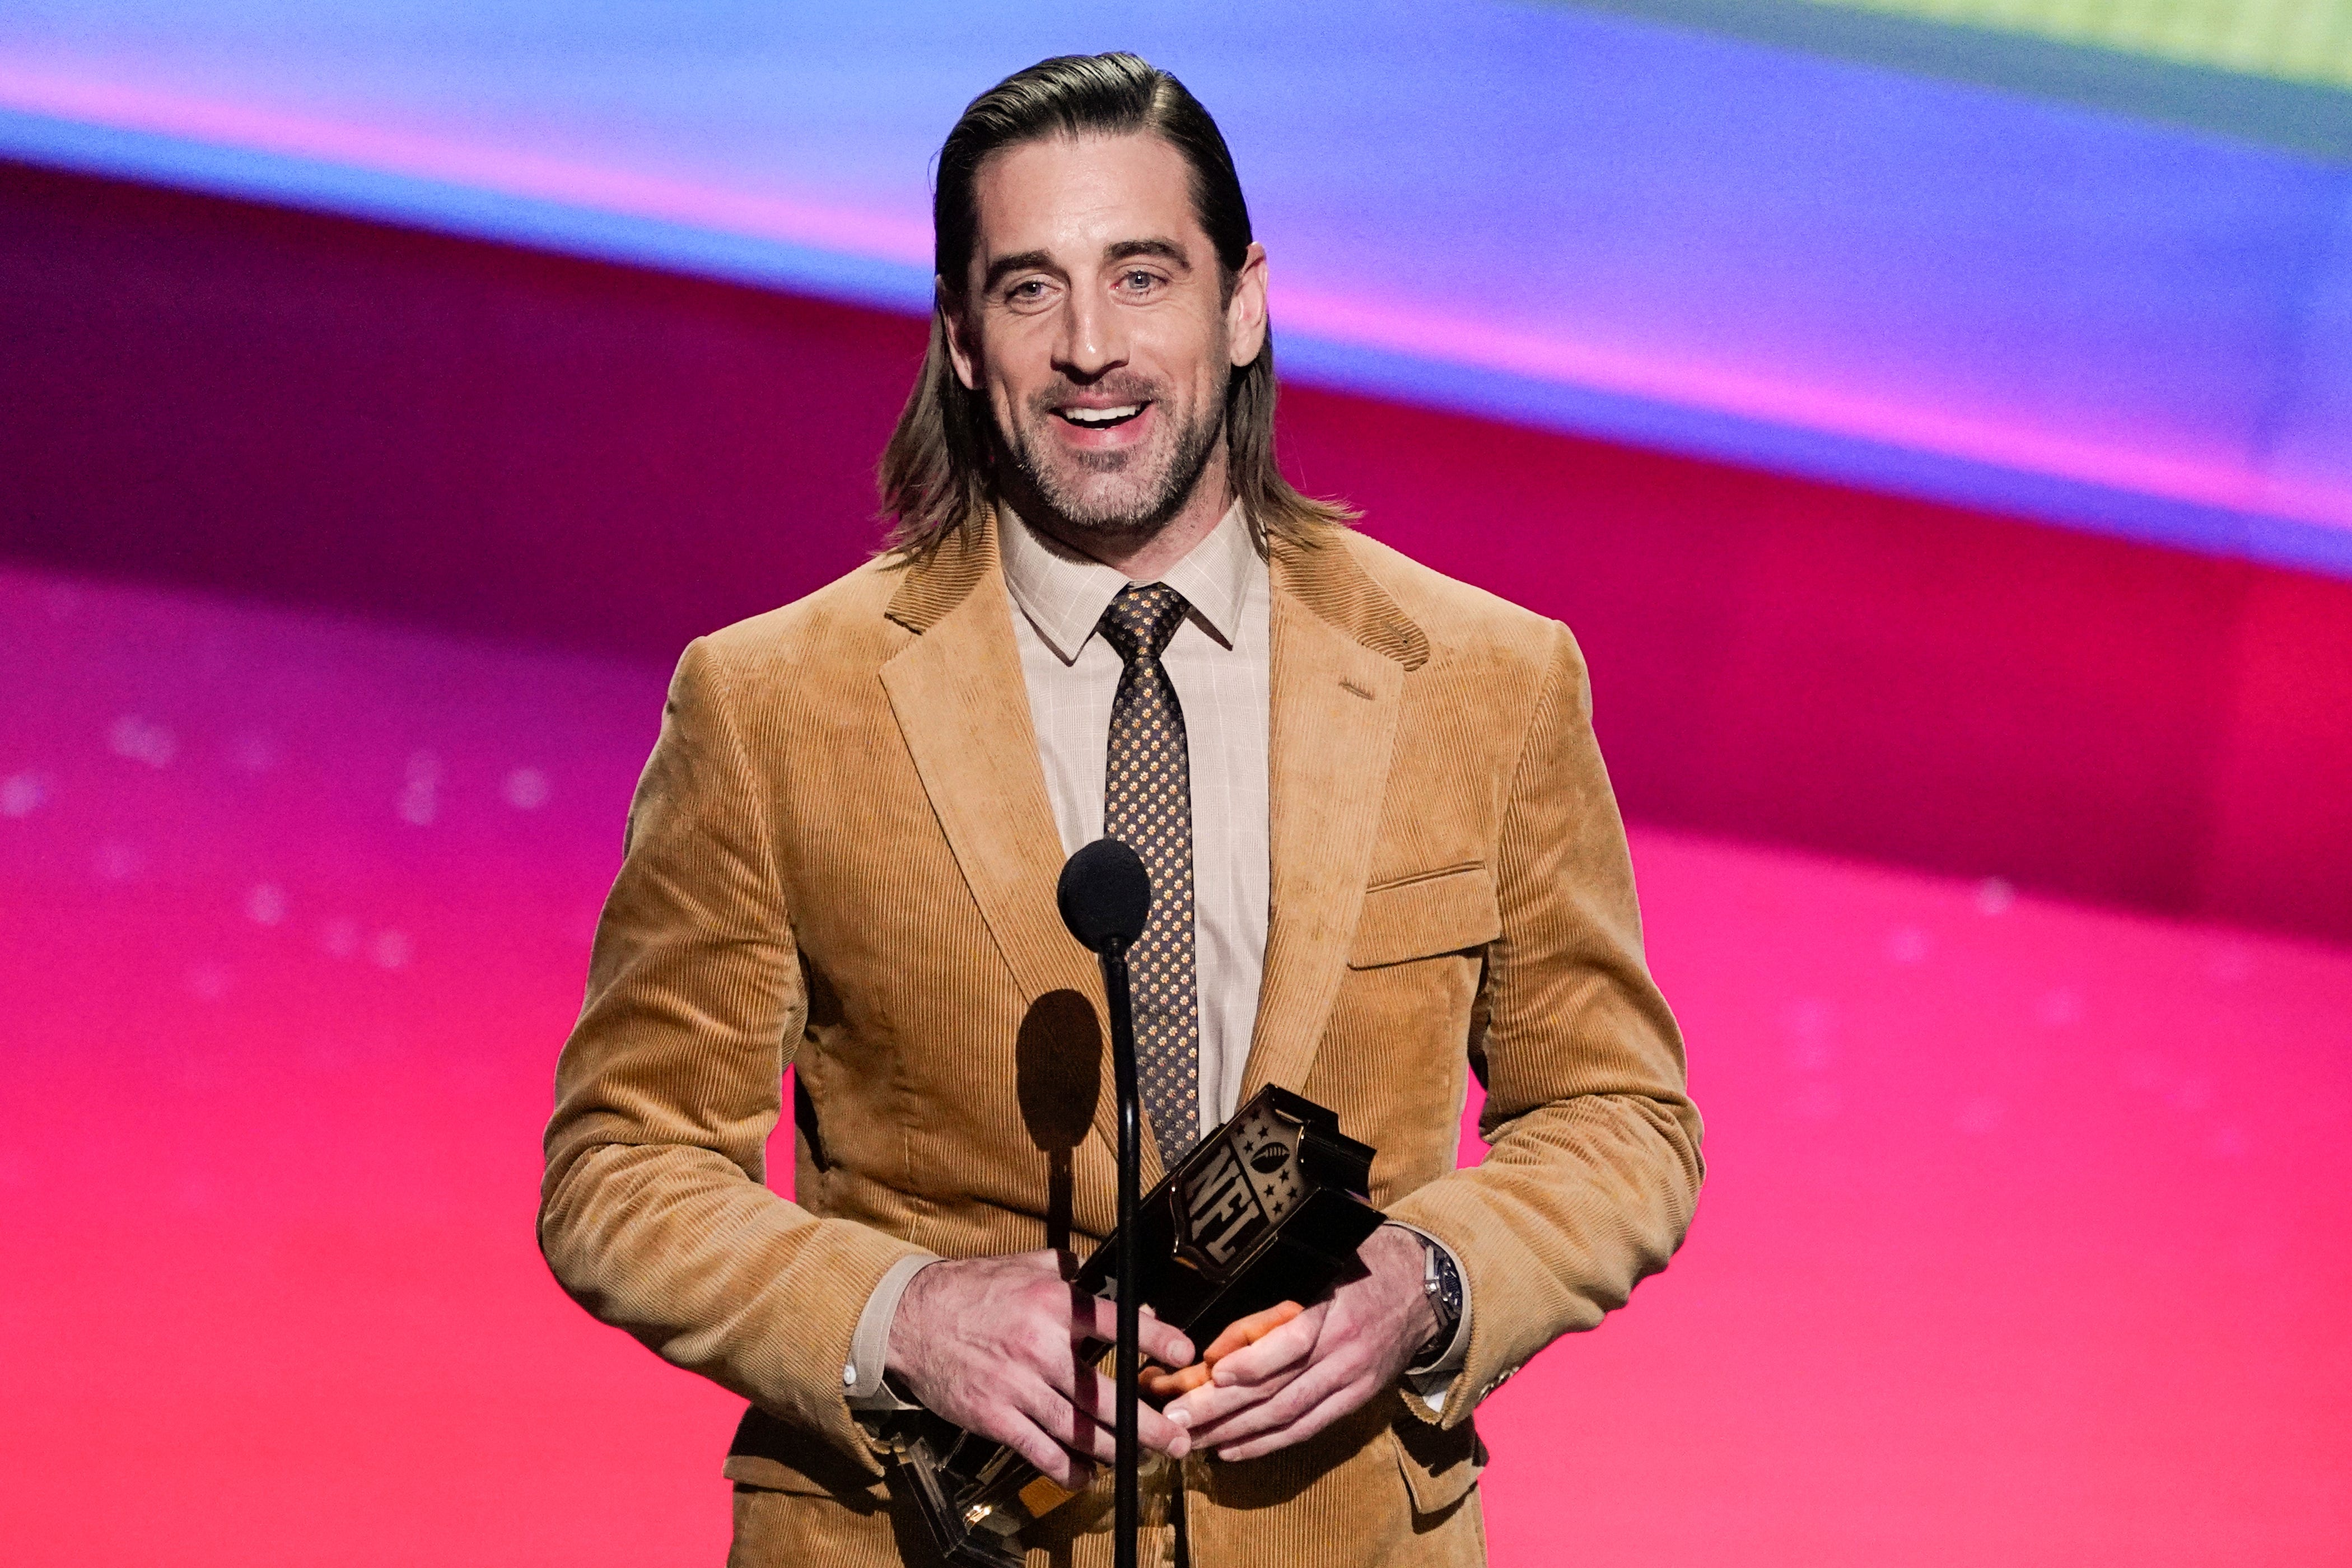 Aaron Rodgers says his appearance at 2022 NFL Honors led to haircut